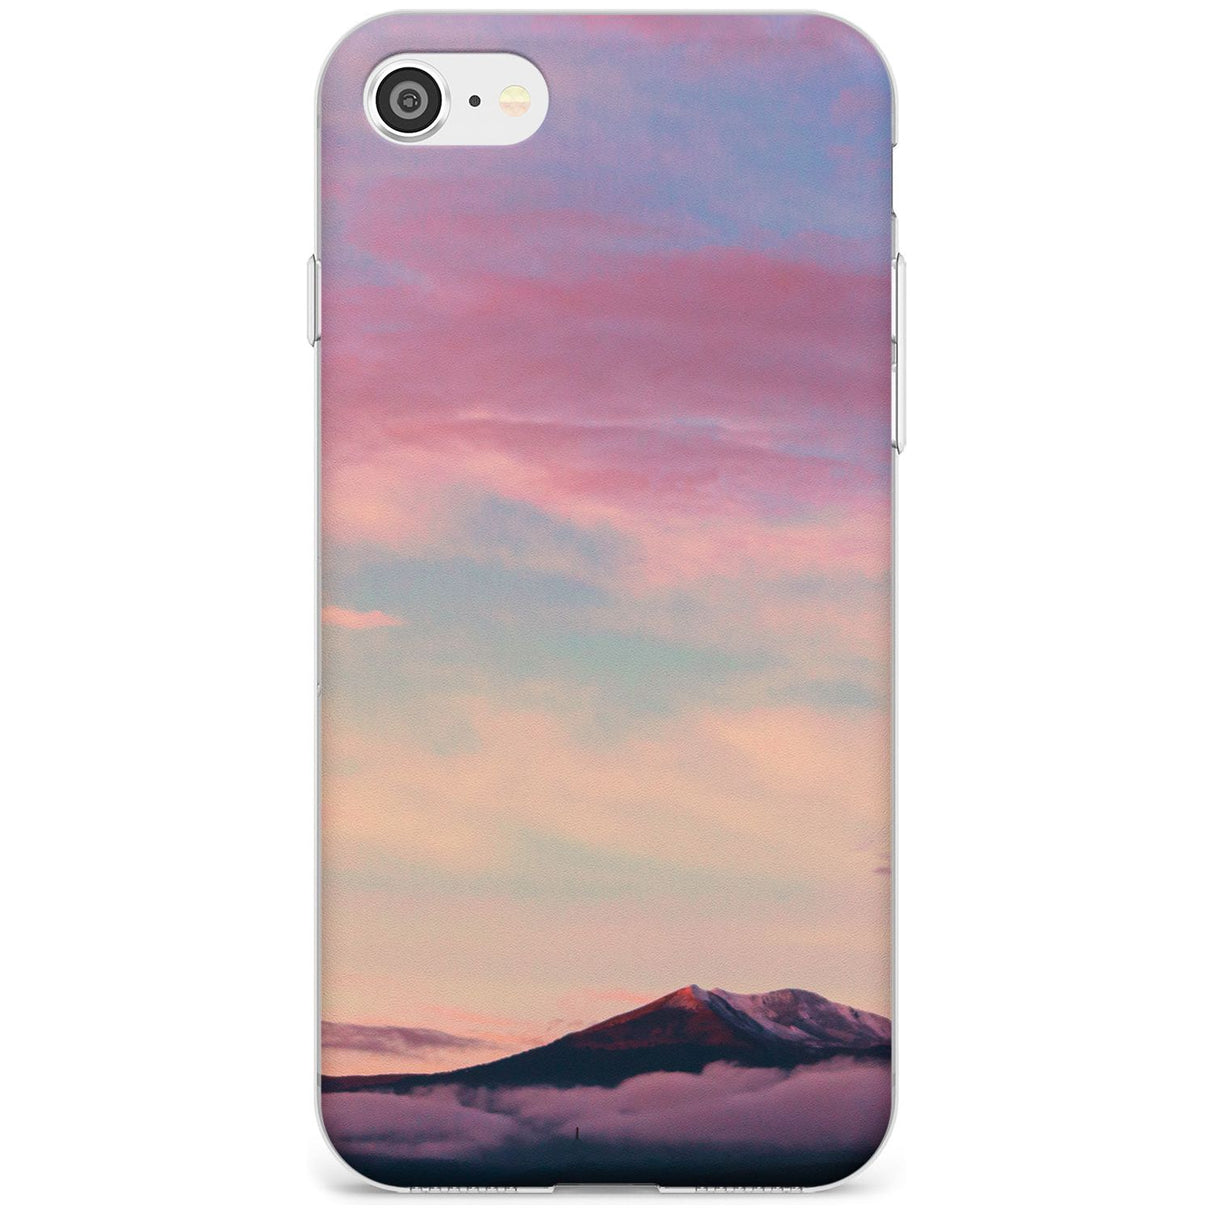 Cloudy Sunset Photograph Slim TPU Phone Case for iPhone SE 8 7 Plus